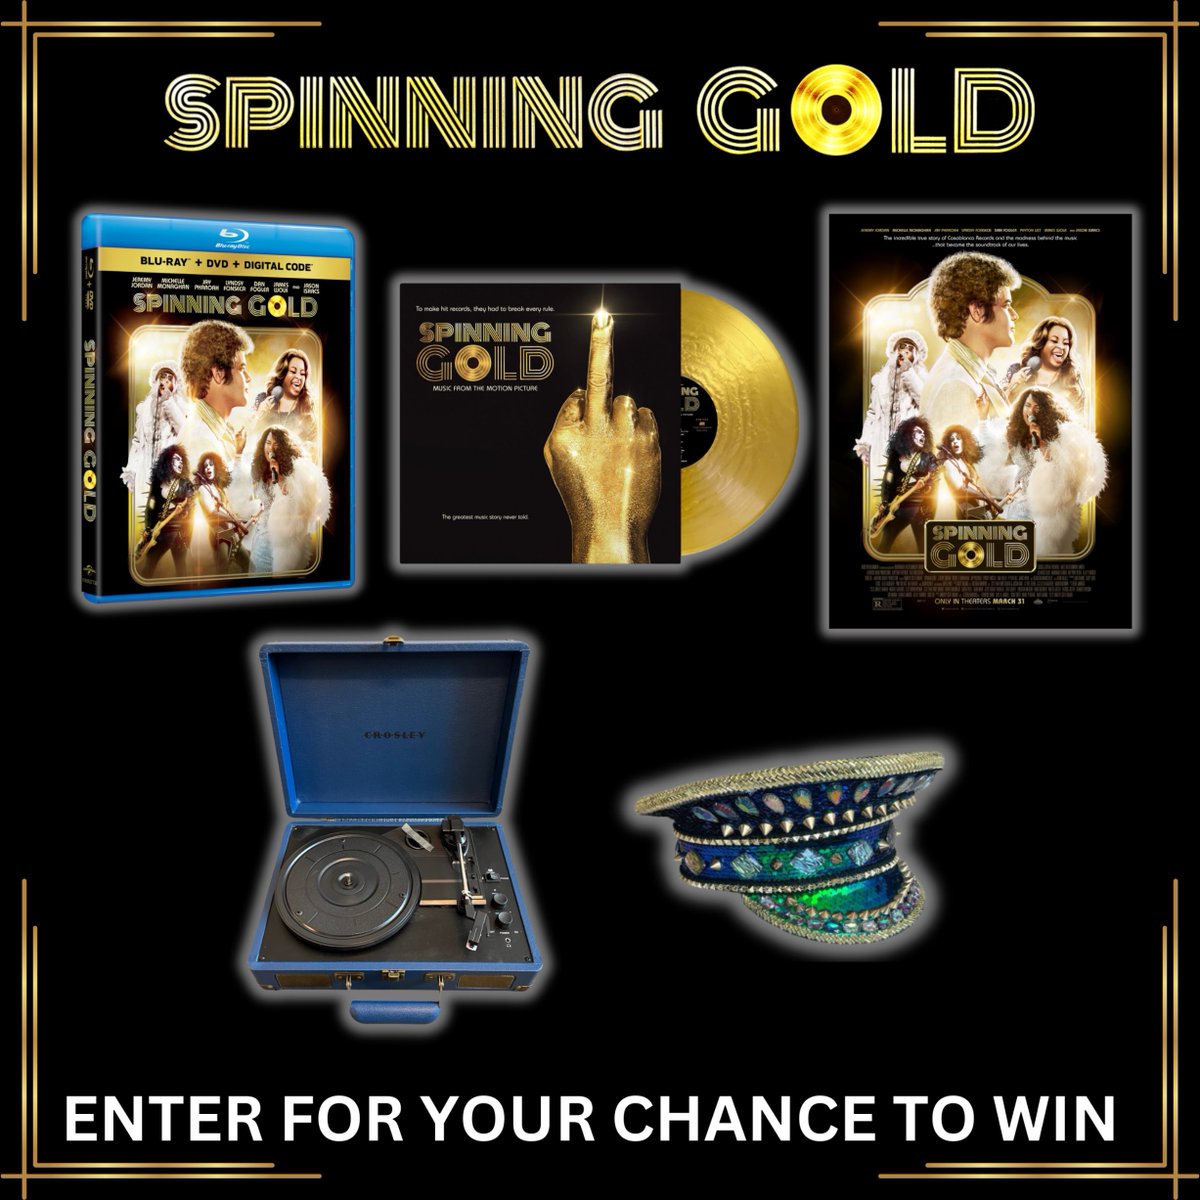 Enter for your chance to win a #SpinningGold Blu-ray combo pack, the vinyl soundtrack, a signed movie poster by @wizkhalifa, a Crosley record player, and a costume hat for Bootsy Collins! No. Pur. Nec. Ends June 6, 2023. 50 U.S. & D.C. 18+. Rules: uni.pictures/SpinningGoldSw…